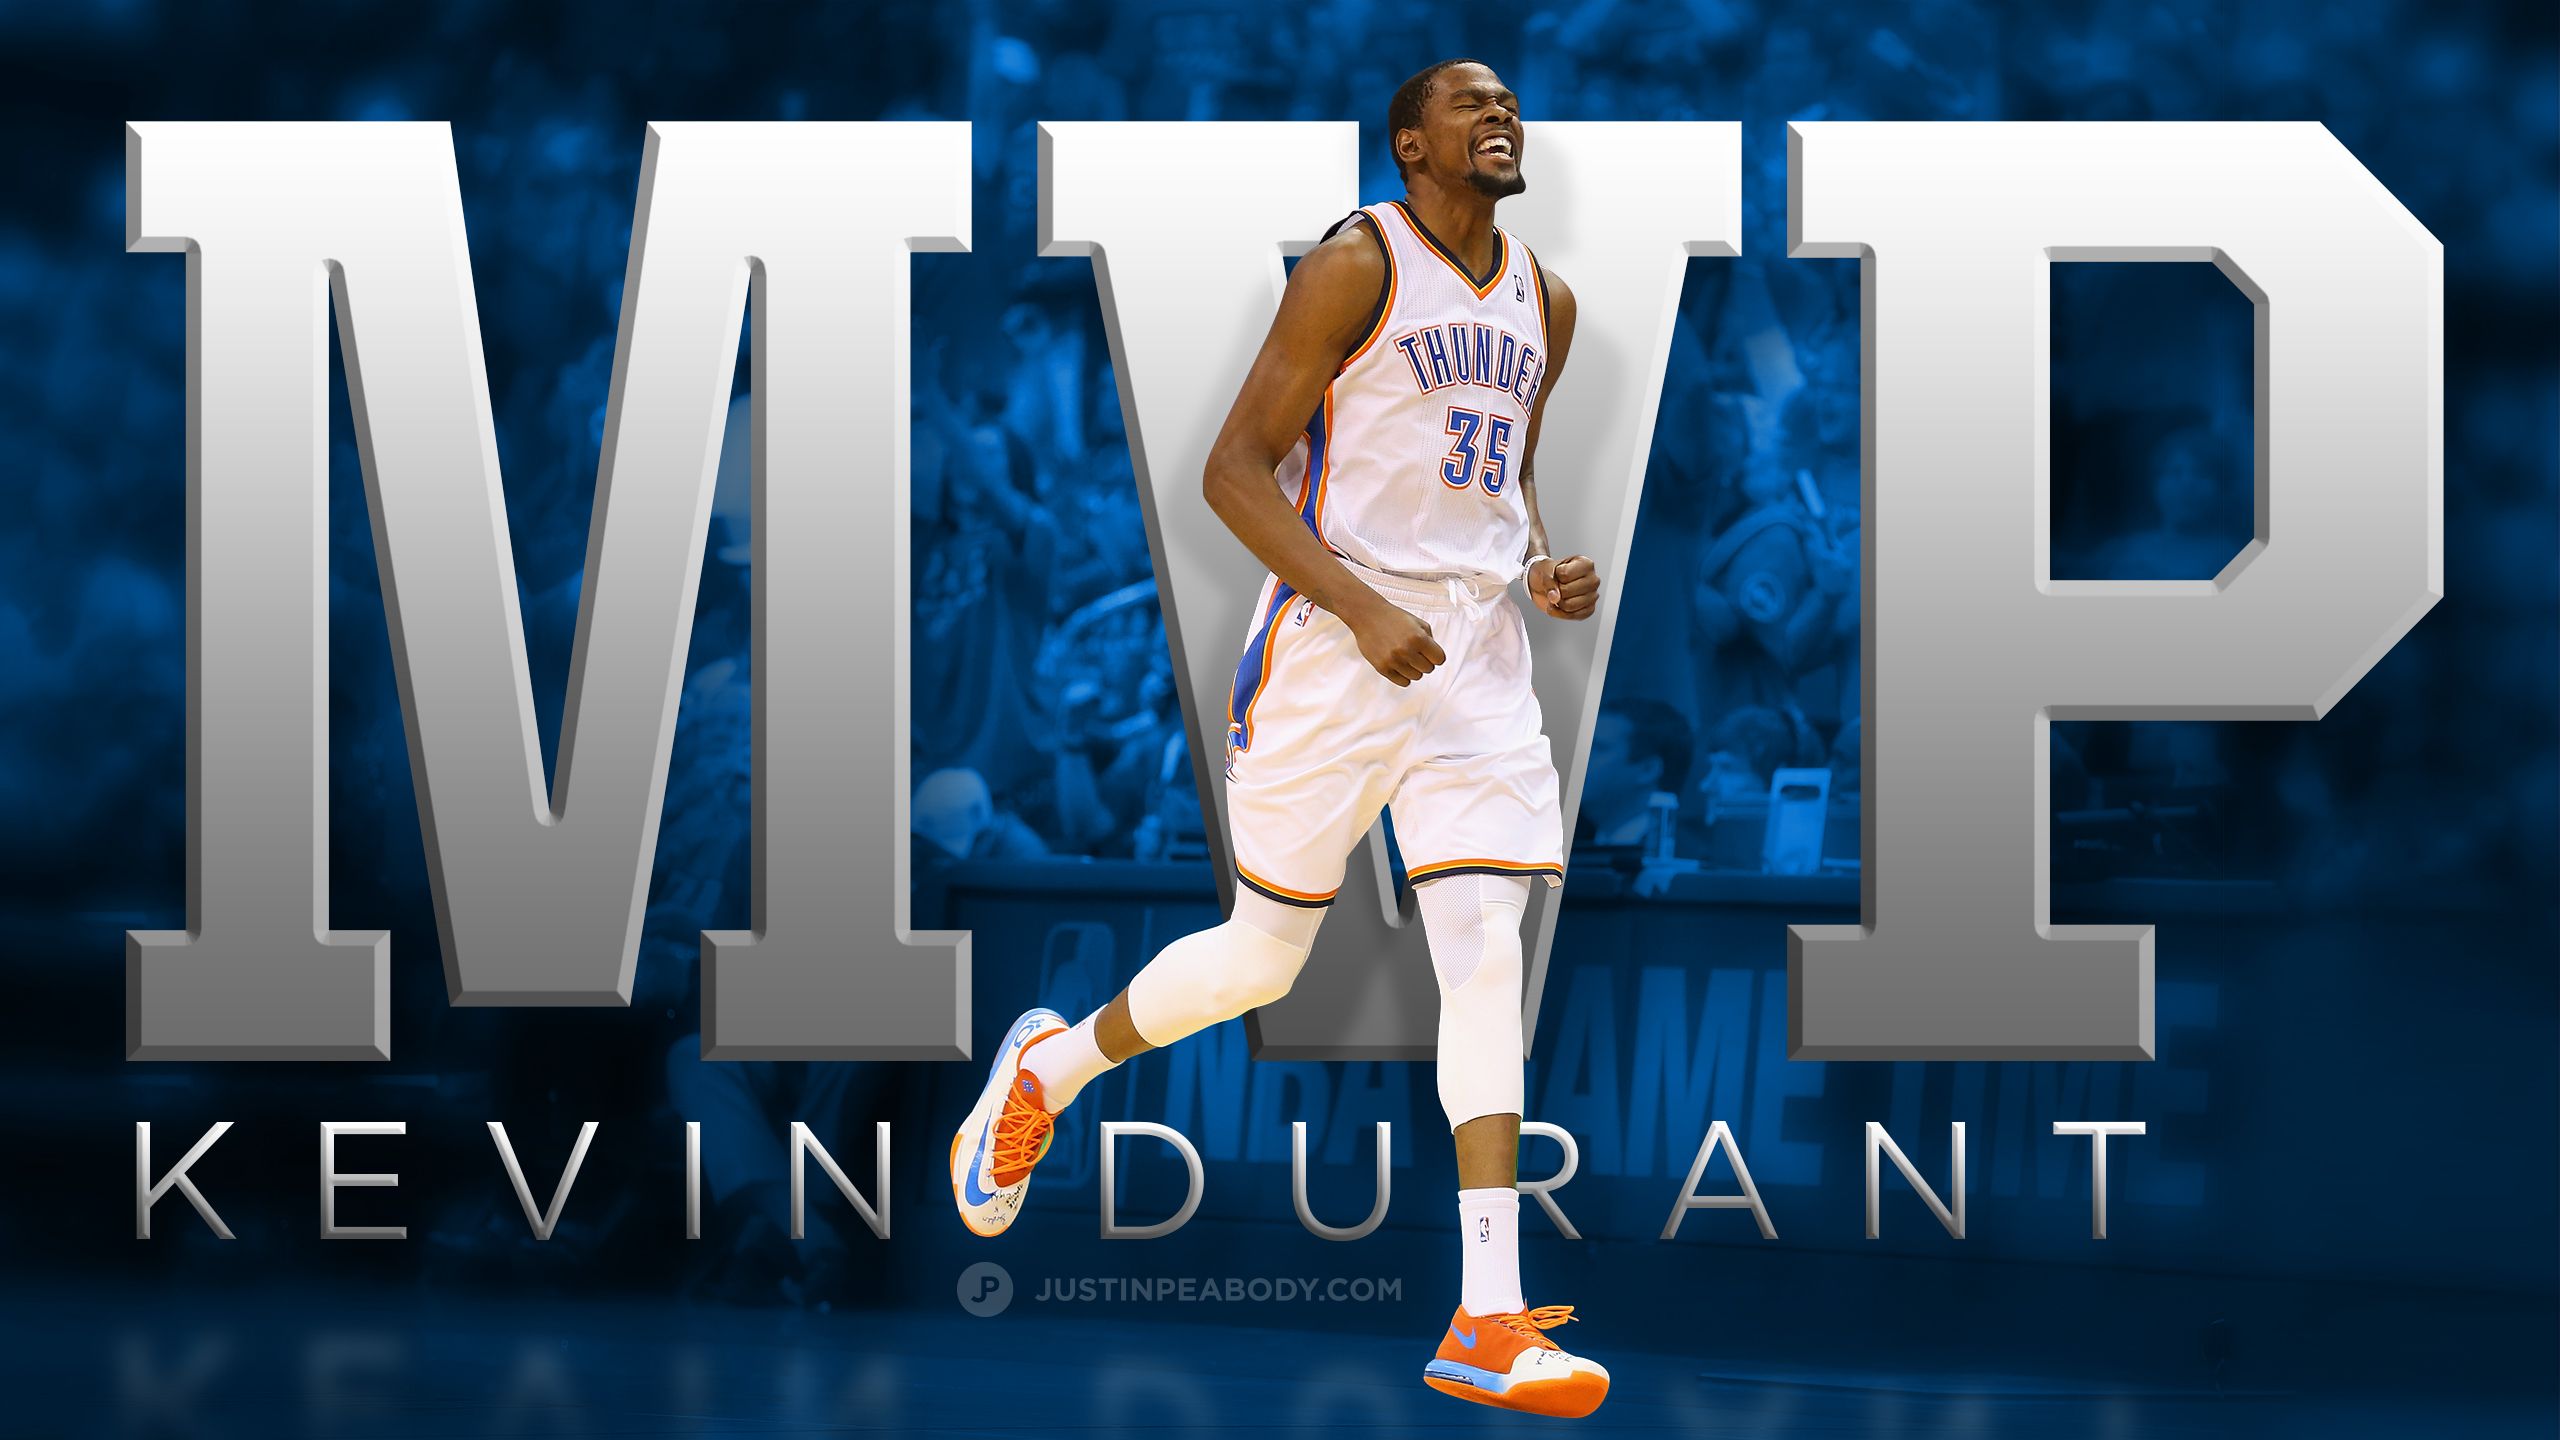 Kevin Durant Mvp Wallpaper Displaying Image For